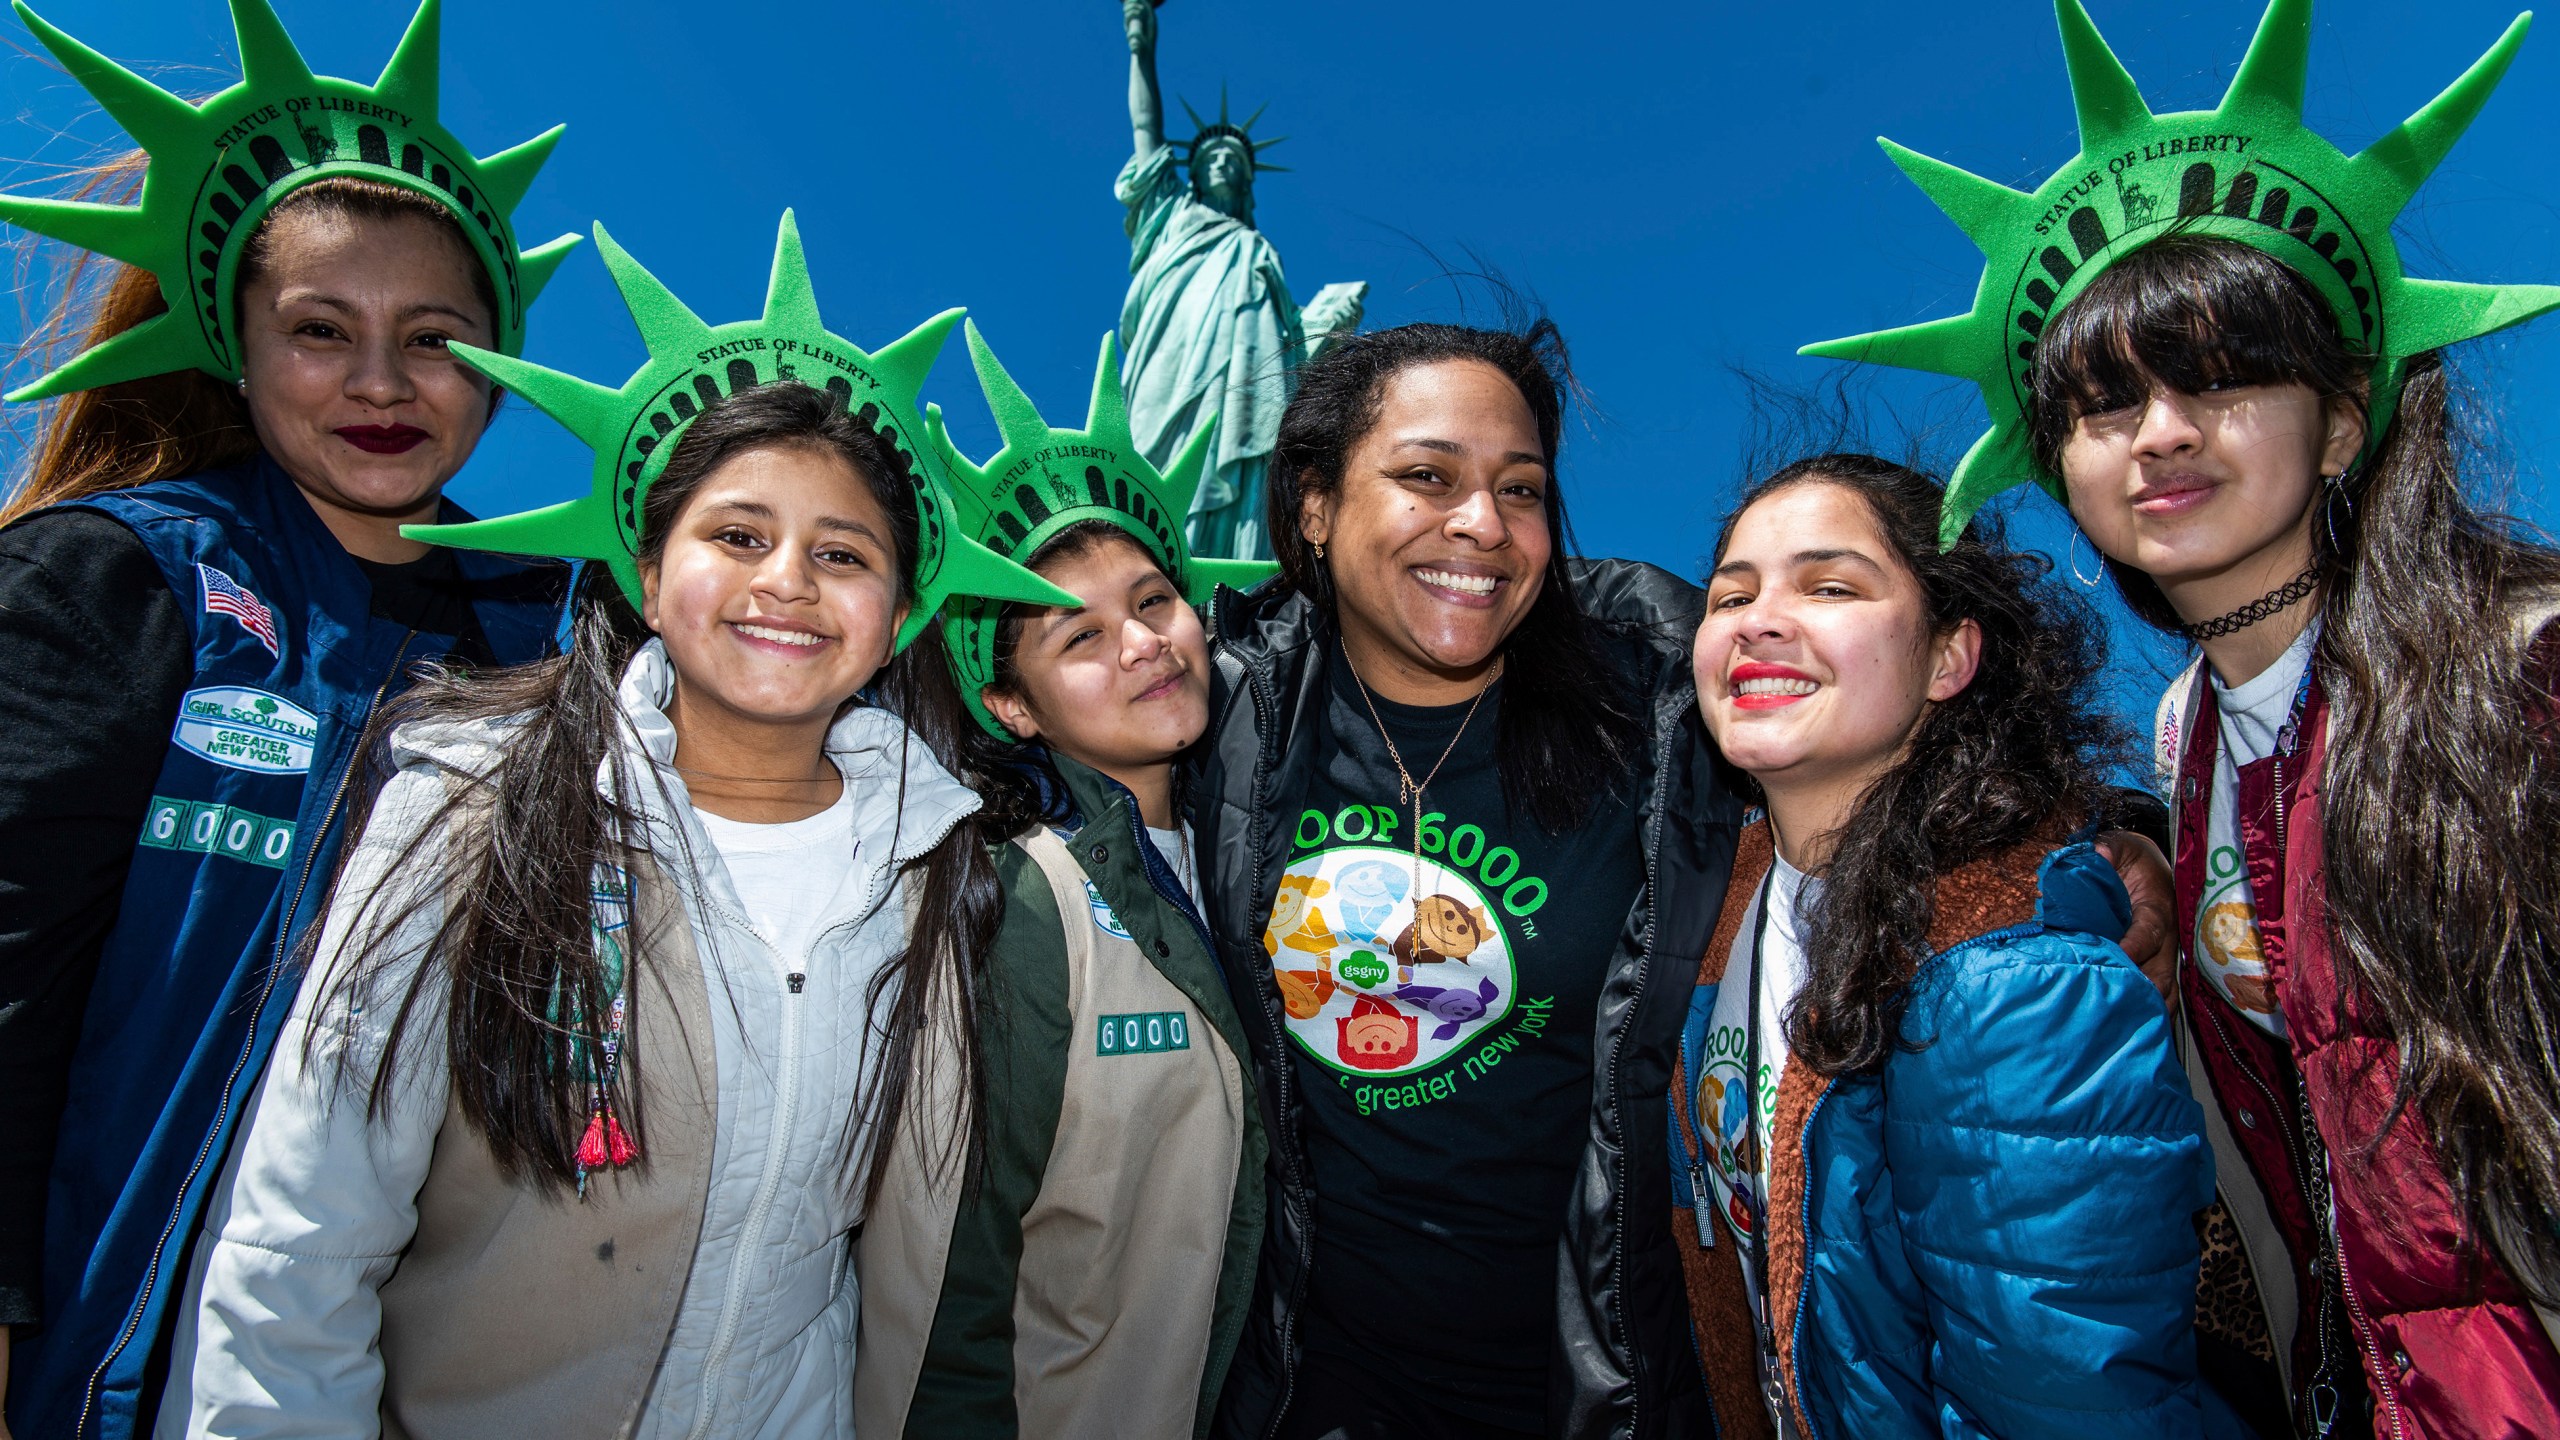 This photo provided by Girl Scouts of Greater New York shows Girl Scouts Troop 6000 paying a visit to the Statue of Liberty in New York in 2023. Troop 6000 has served kids who live in New York's shelter system since 2017, quietly welcoming hundreds of the city’s youngest new residents with the support of donations. (Kelly Marsh/Girl Scouts of Greater New York via AP)